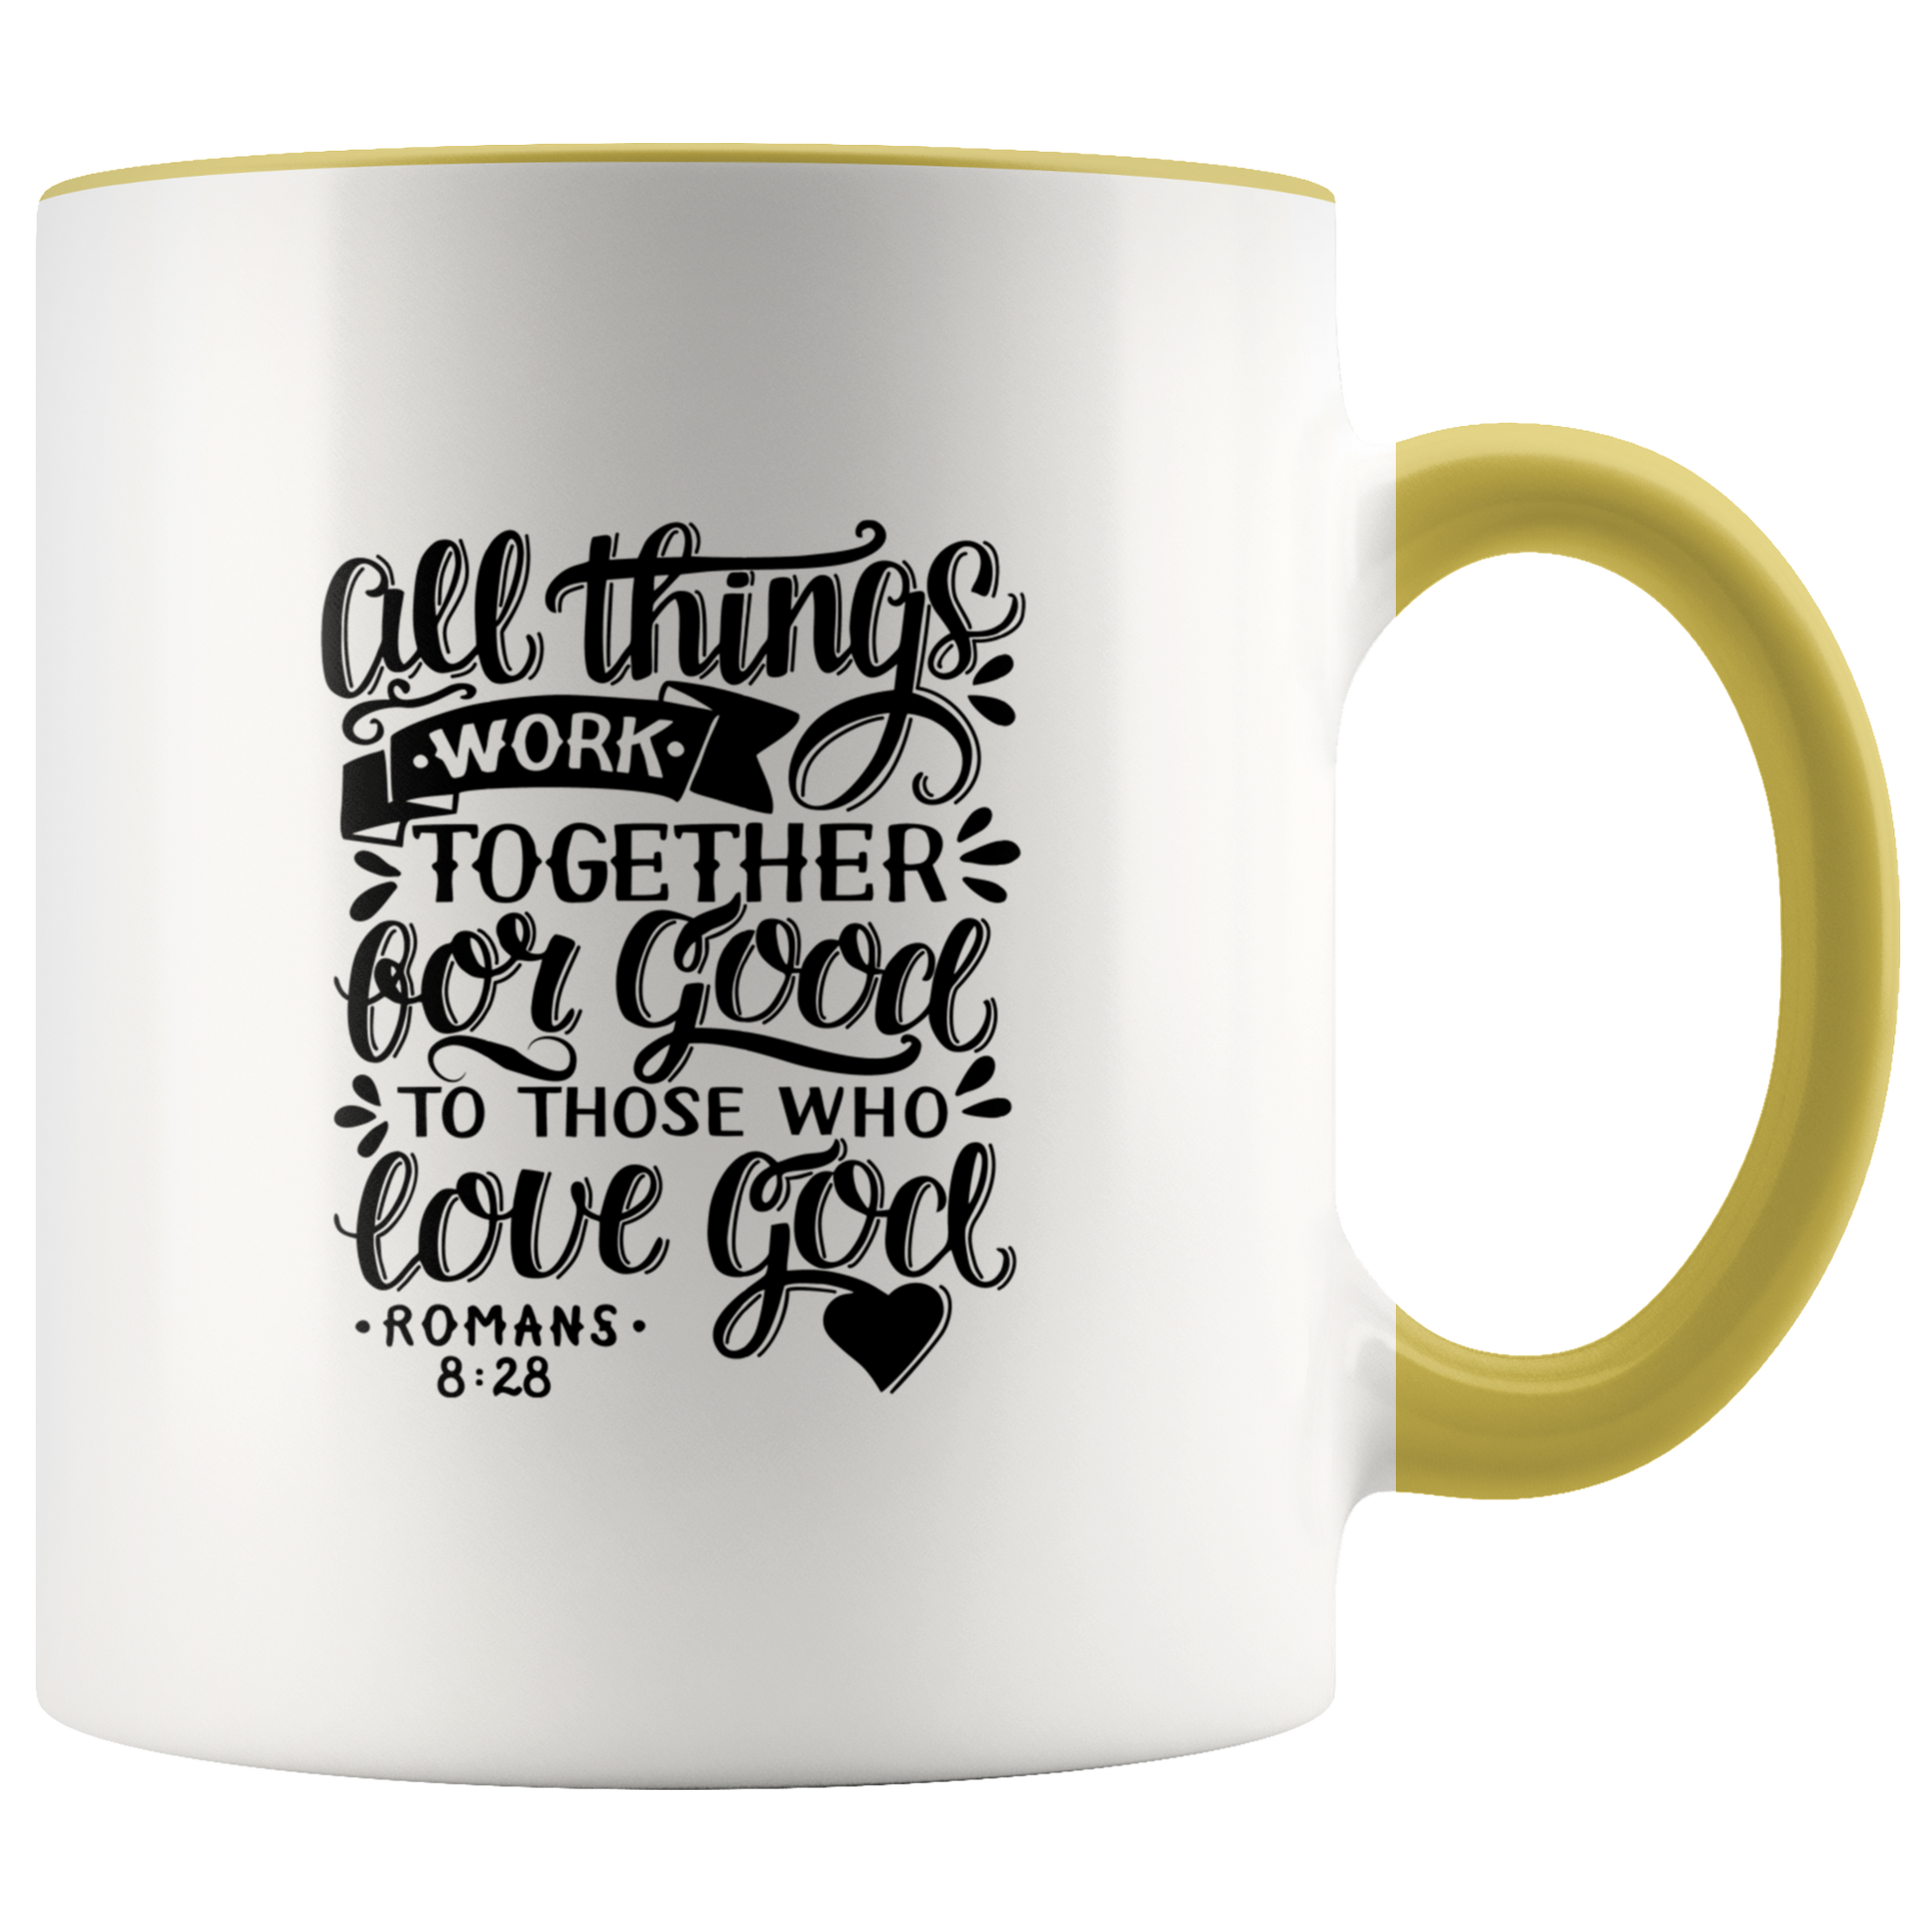 All Things Work Together For Good To Those Who Love God, Romans 8:28 - Accent Mug yellow